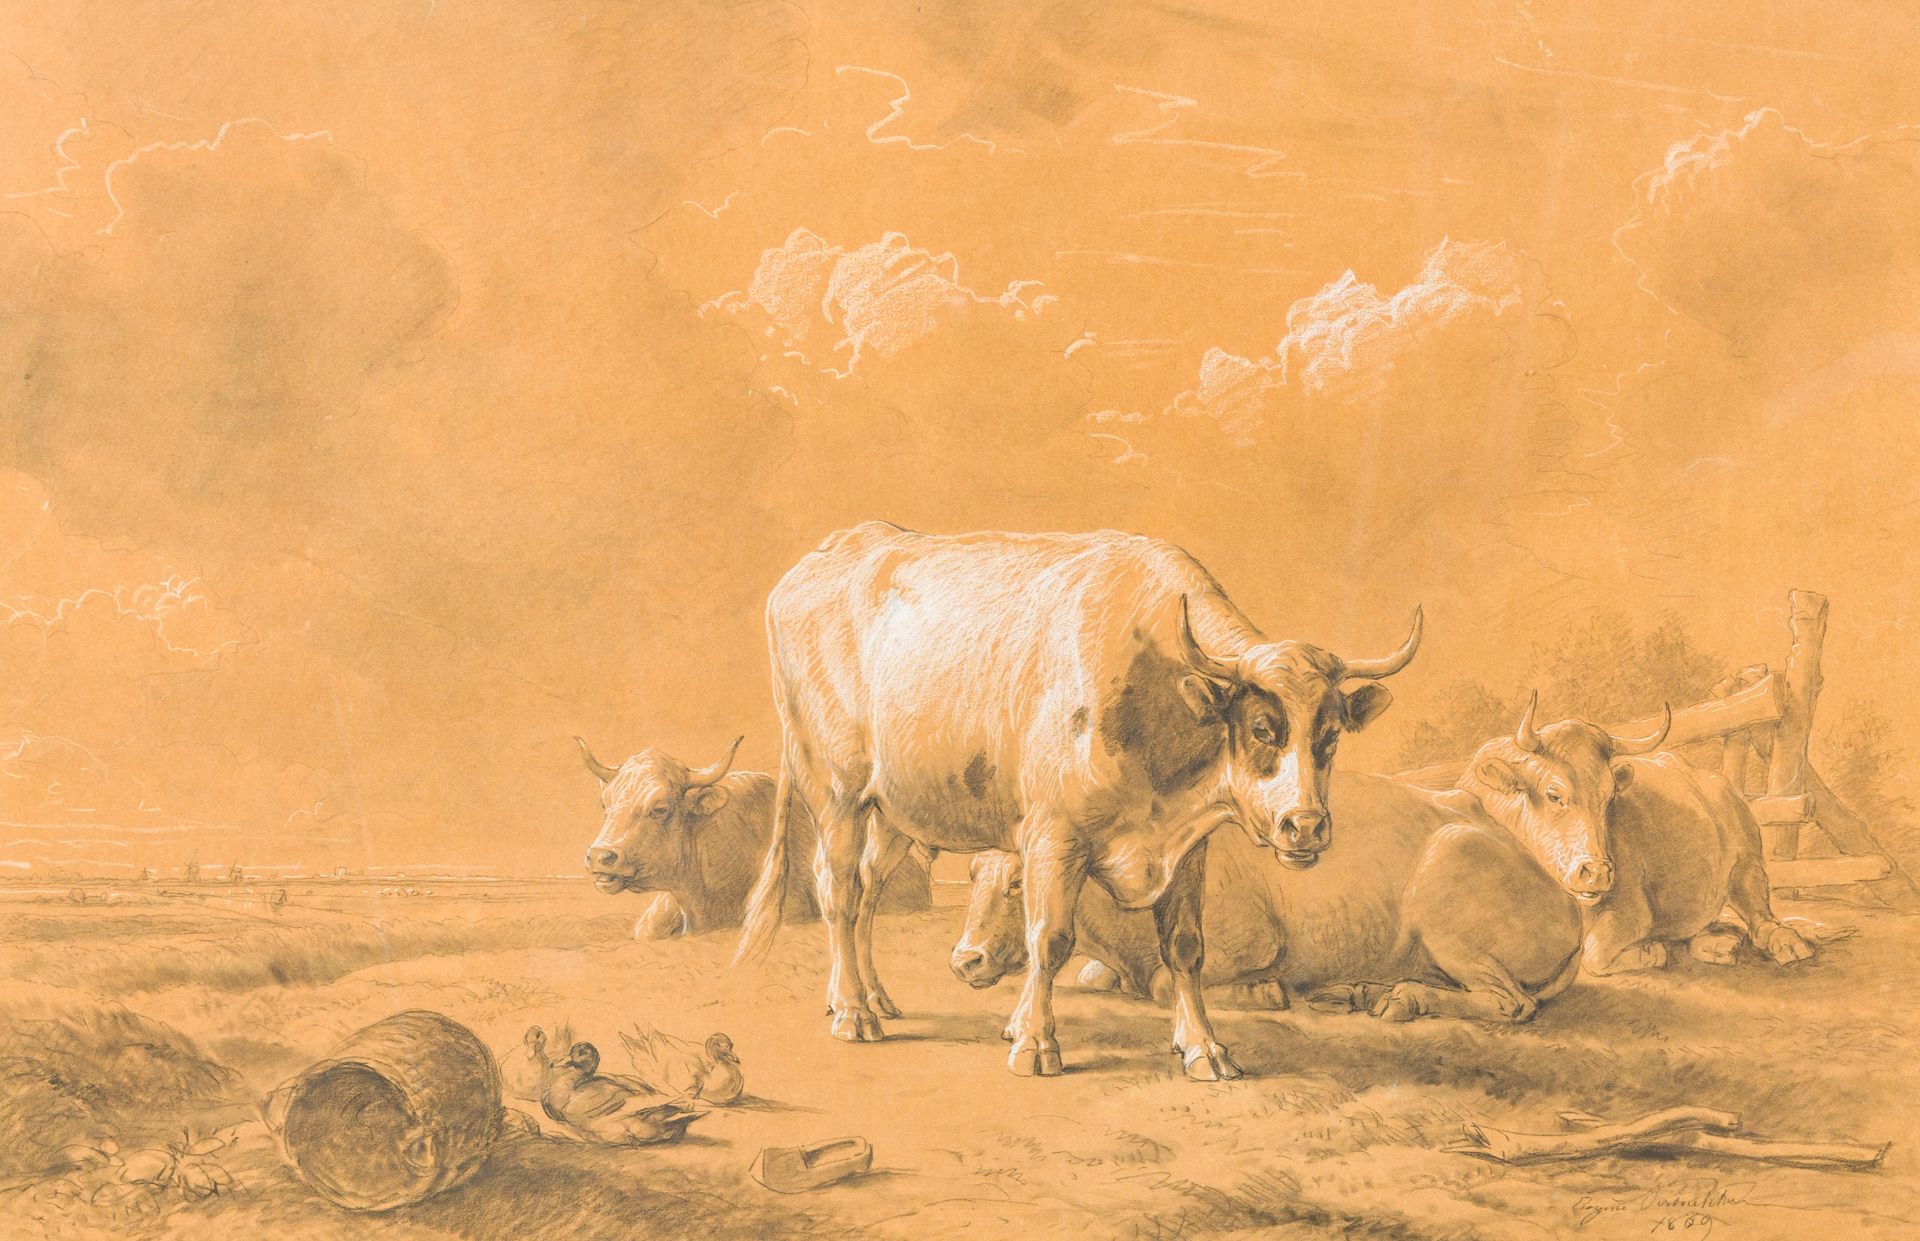 Eugene Verboeckhoven (1798-1881): Cattle in a landscape, mixed media on paper, dated 1869